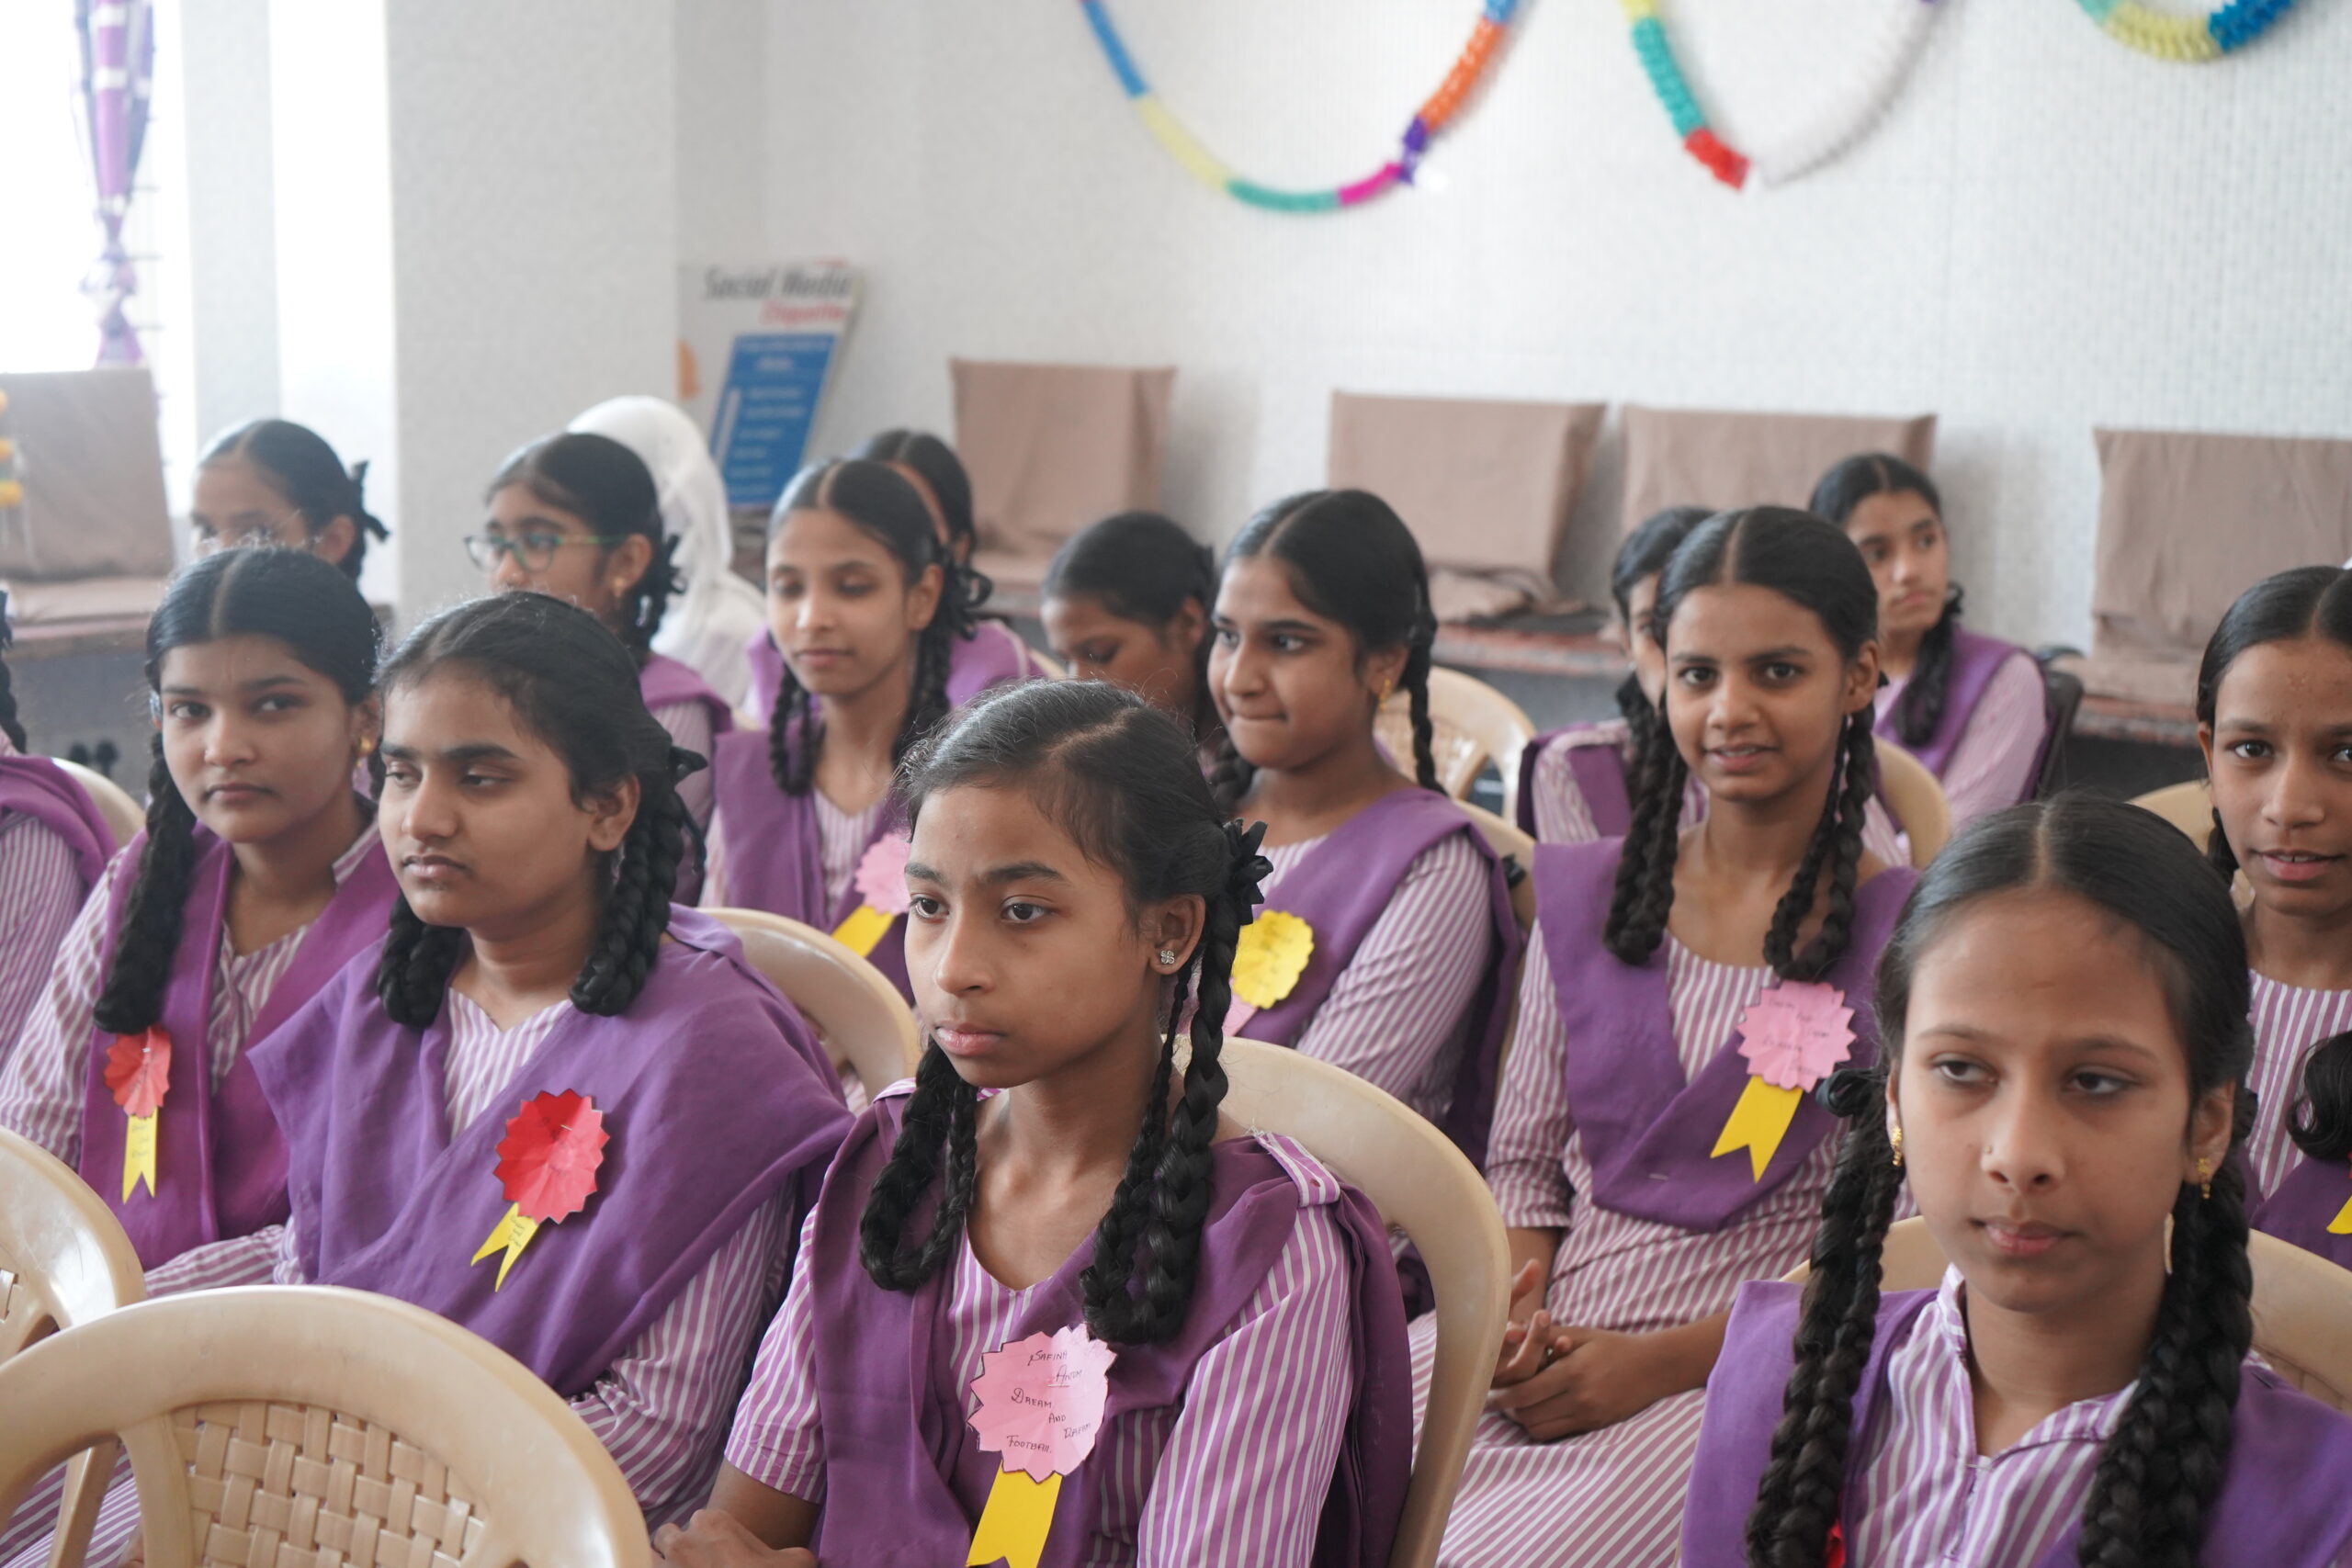 What is lacking in life skills assessments in India? – IDR Online